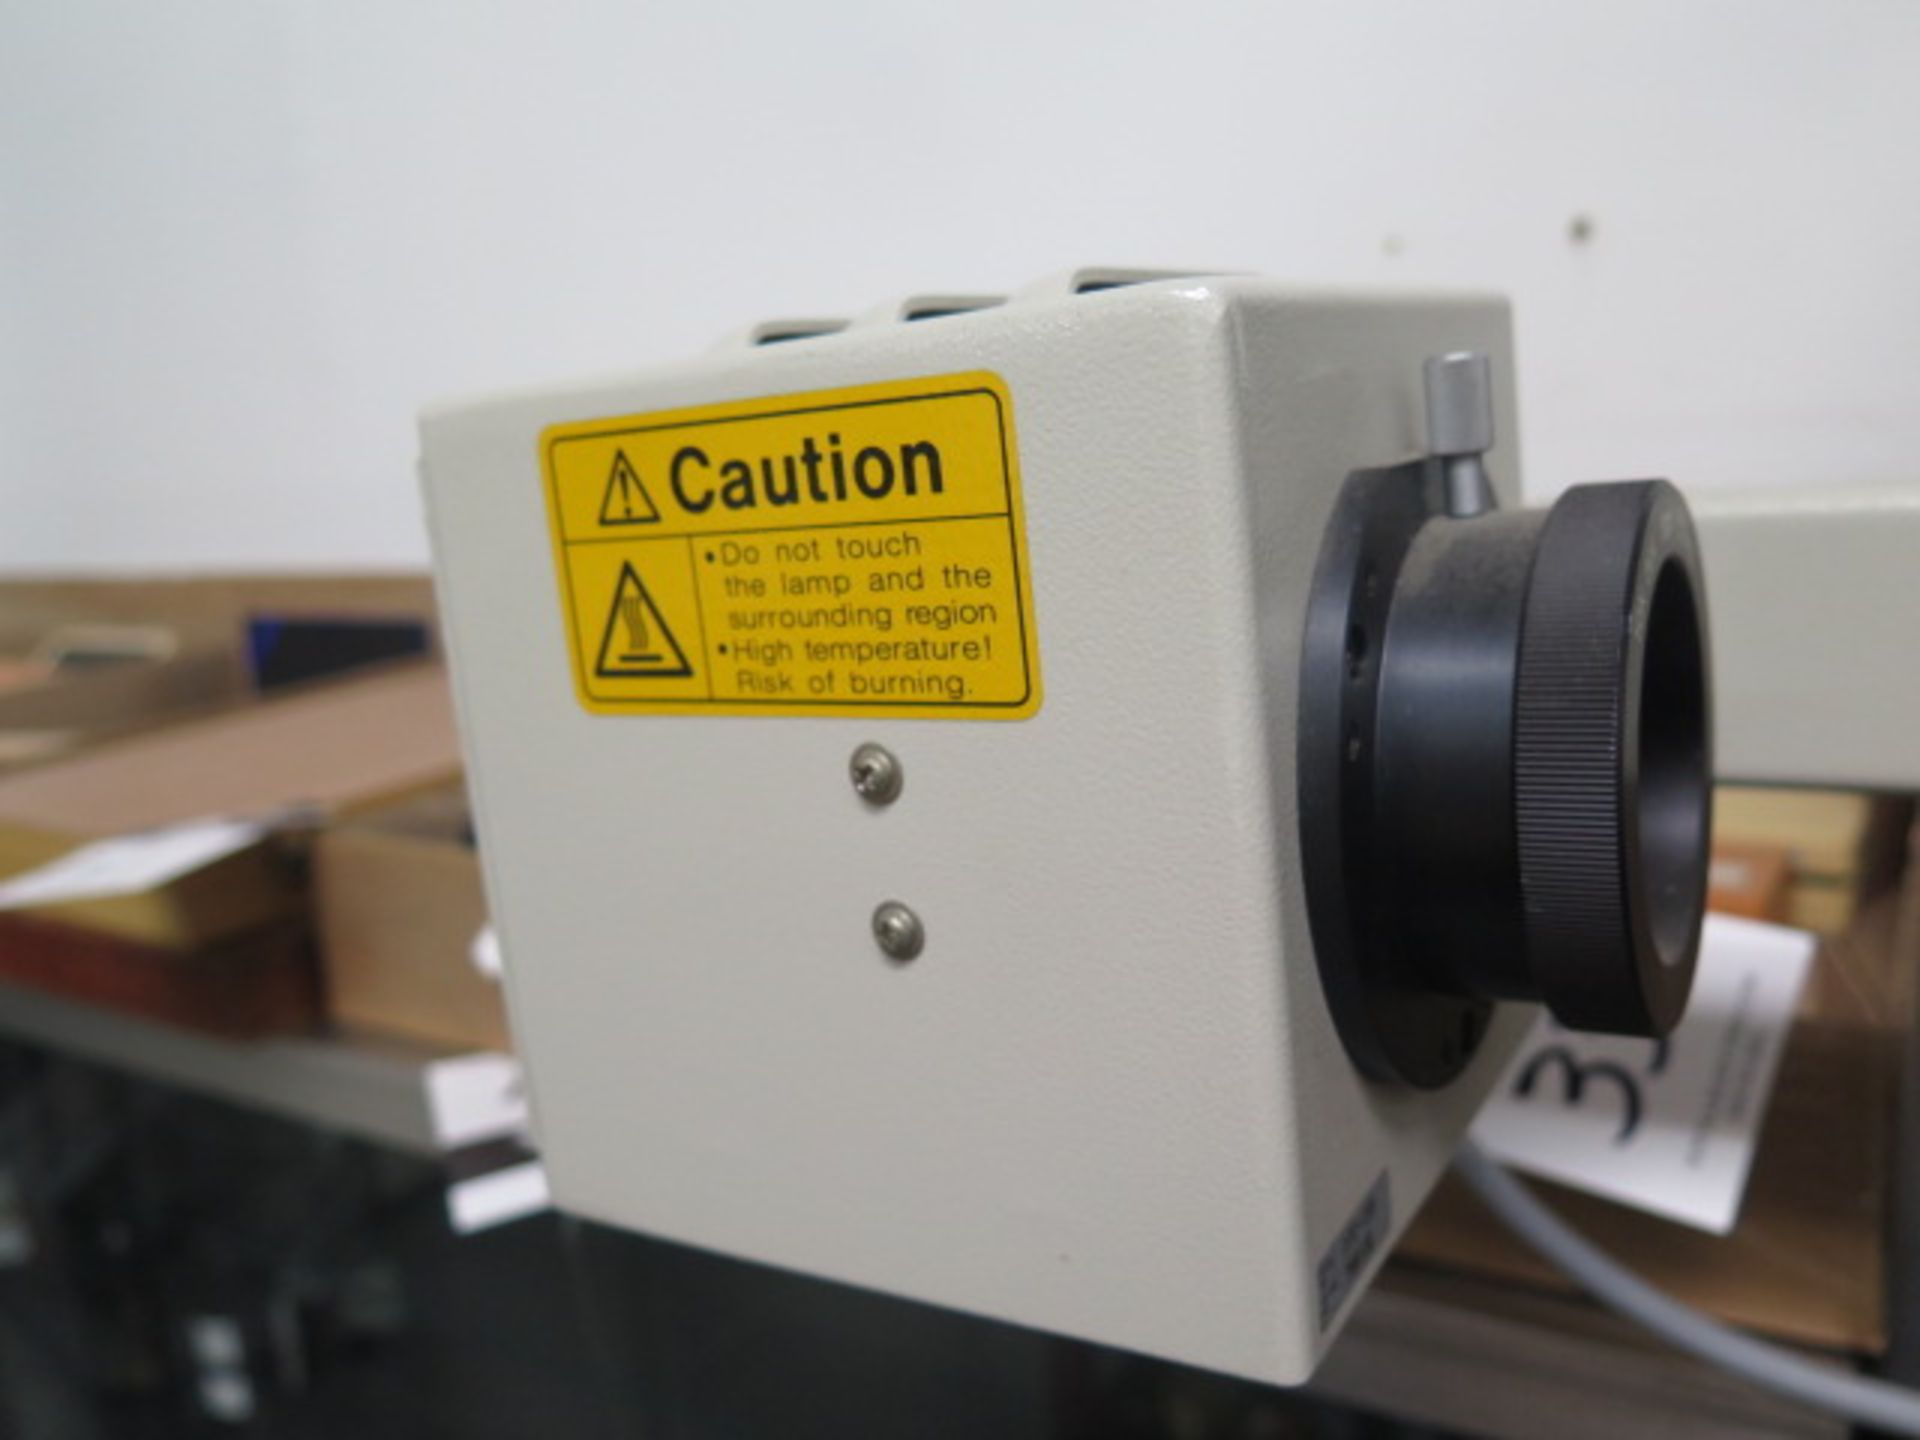 Mitutoyo PH-3500 15” Optical Comparator s/n 750161 w/ Mitutoyo UDR-220 Programmable DRO, Digital - Image 11 of 13